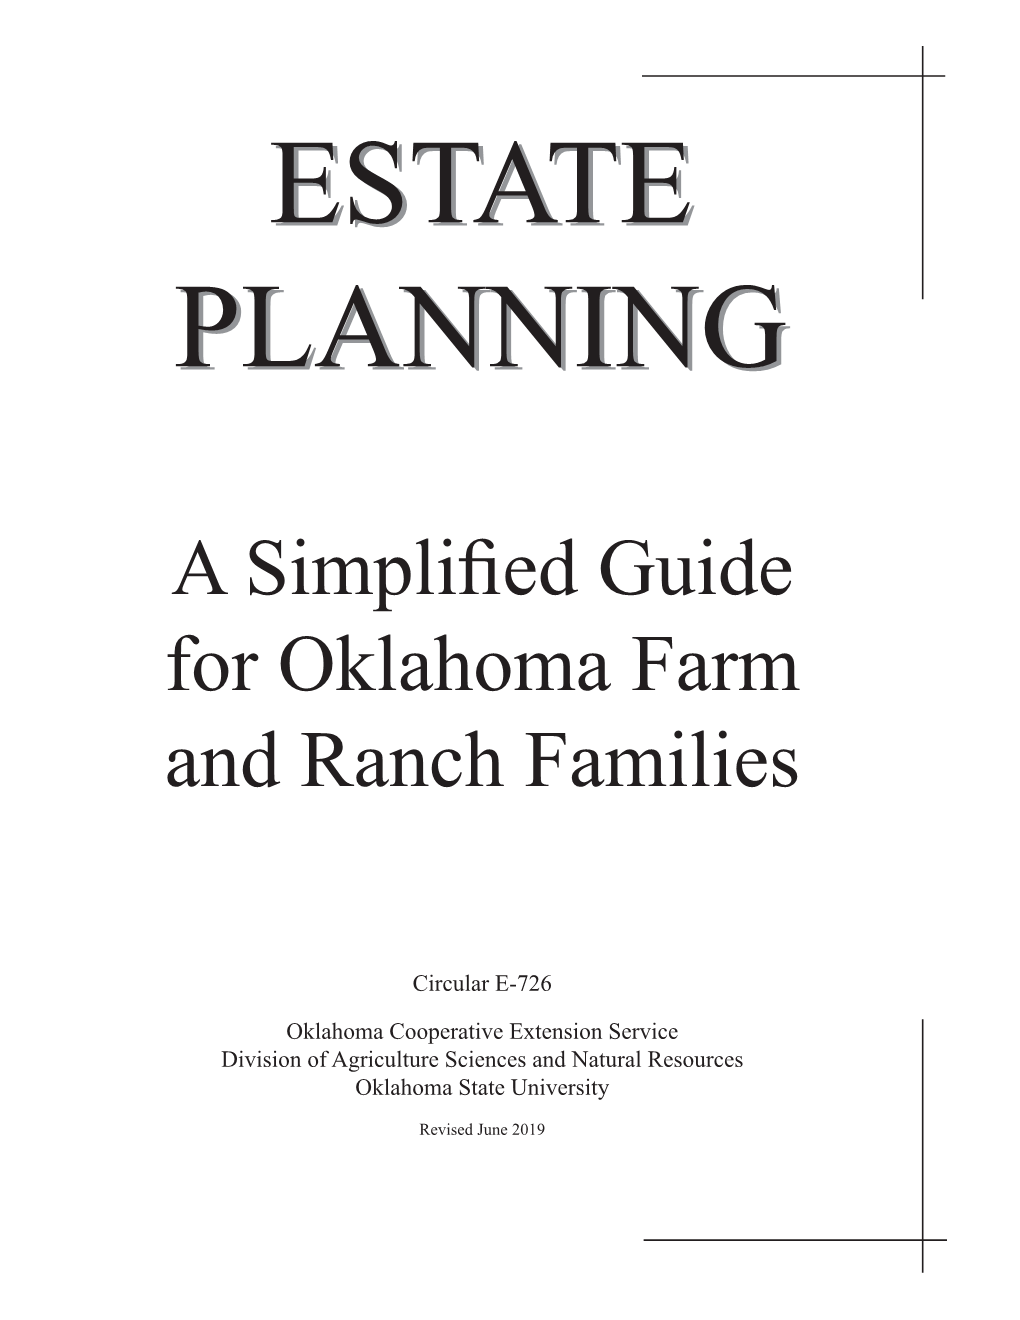 A Simplified Guide for Oklahoma Farm and Ranch Families